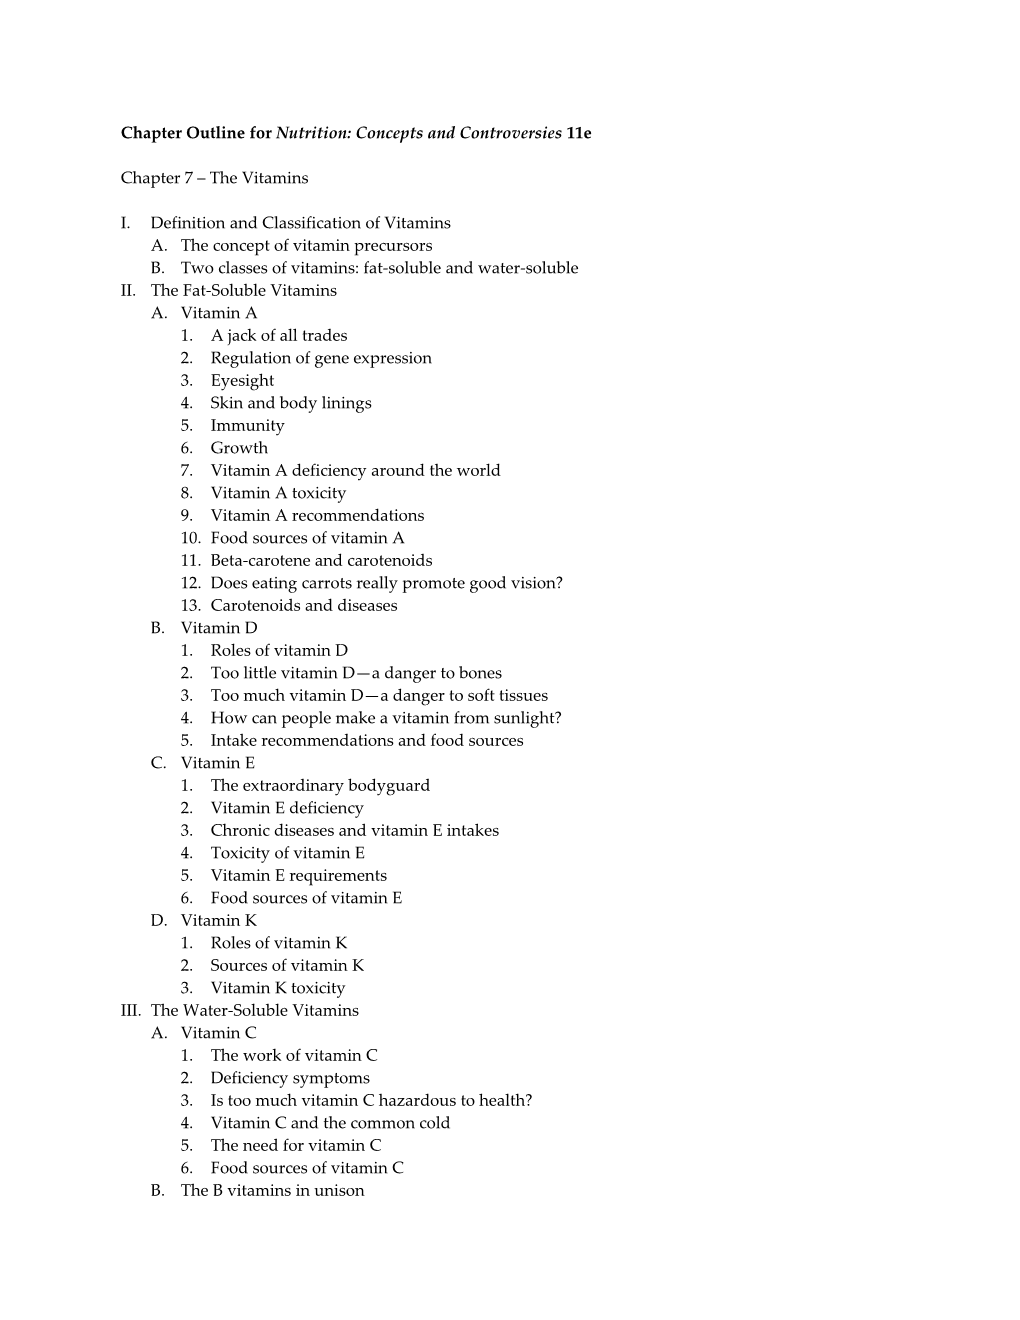 Chapter Outline for Nutrition: Concepts and Controversies 11E